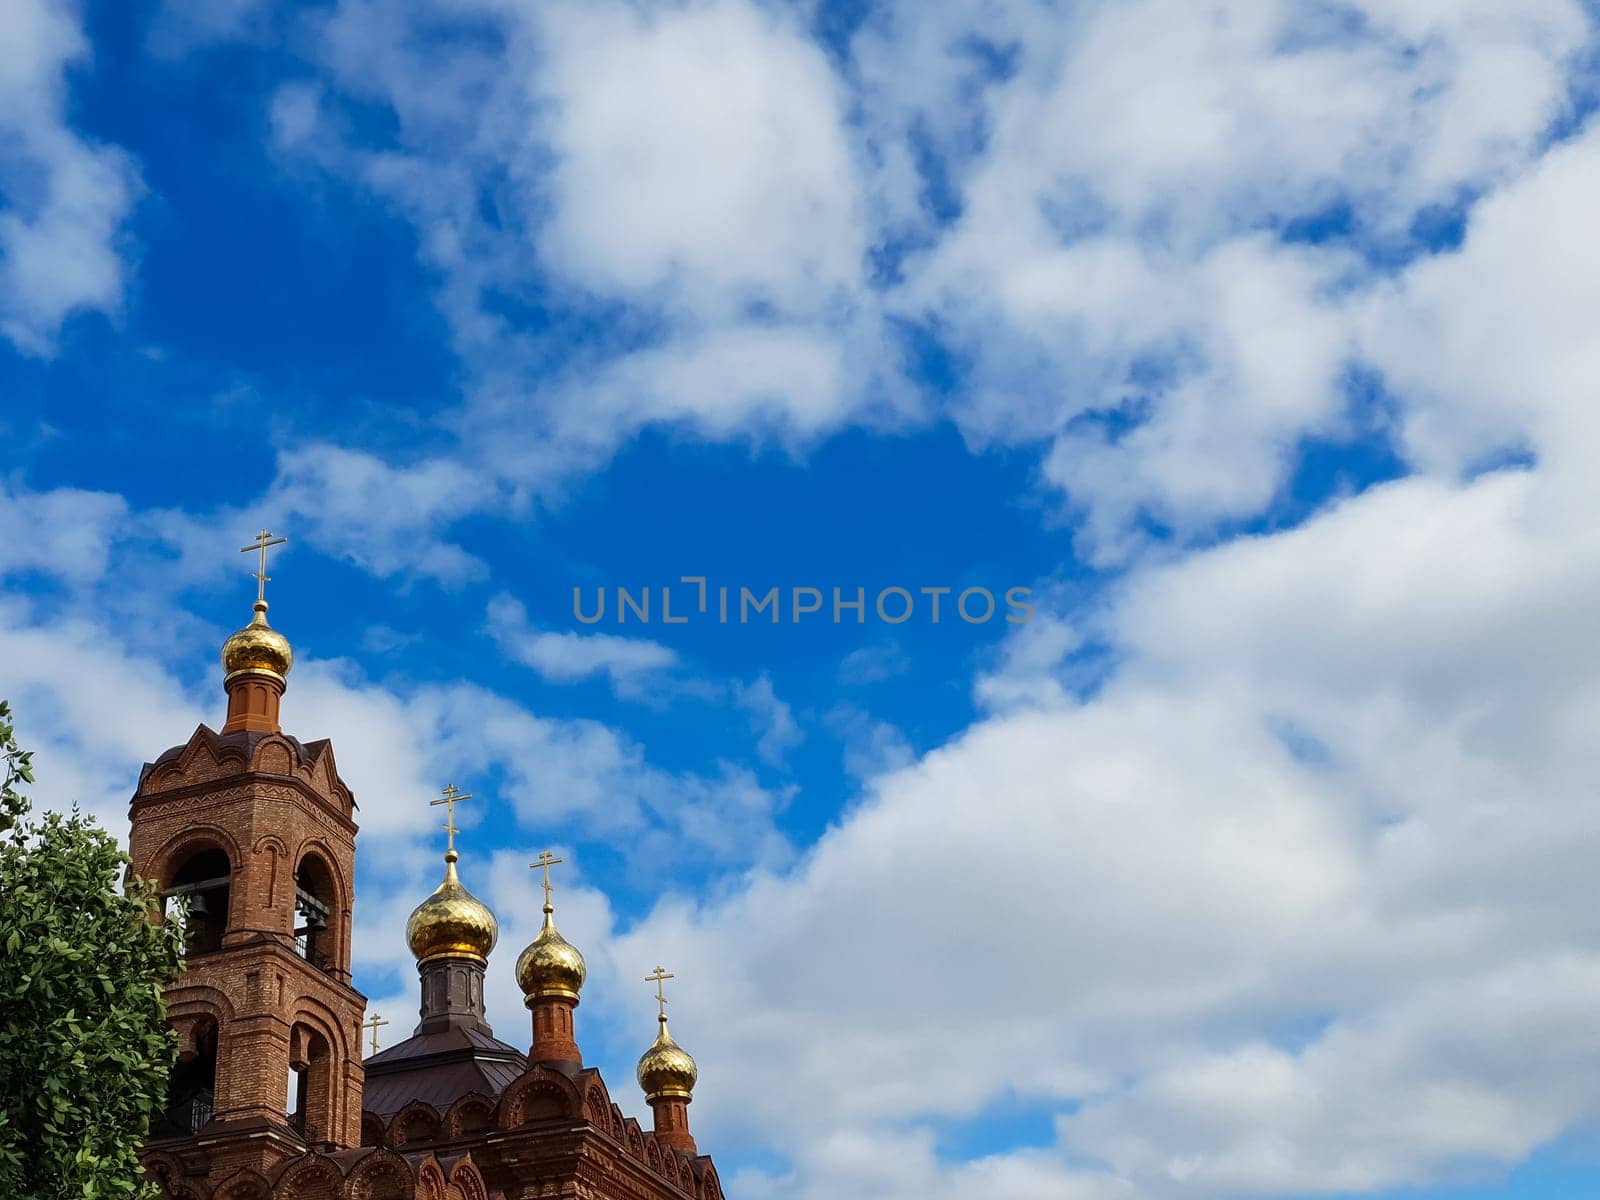 Domes of the church on the background of a blue sky with clouds by Spirina